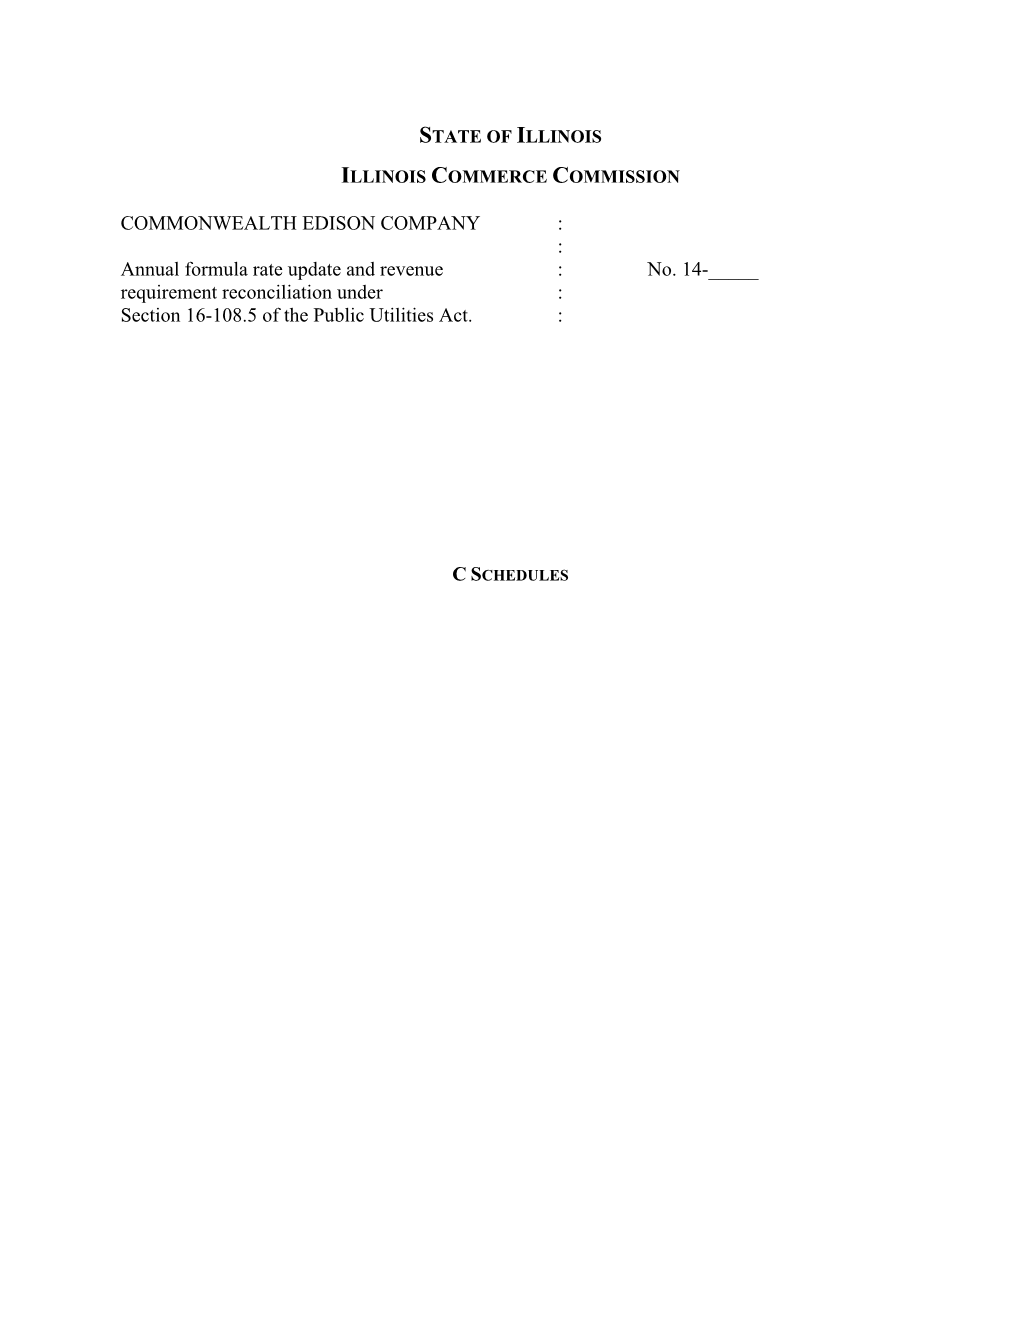 COMMONWEALTH EDISON COMPANY Annual Formula Rate Update and Revenue Requirement Reconciliation Under Section 16-108.5 of the Publ